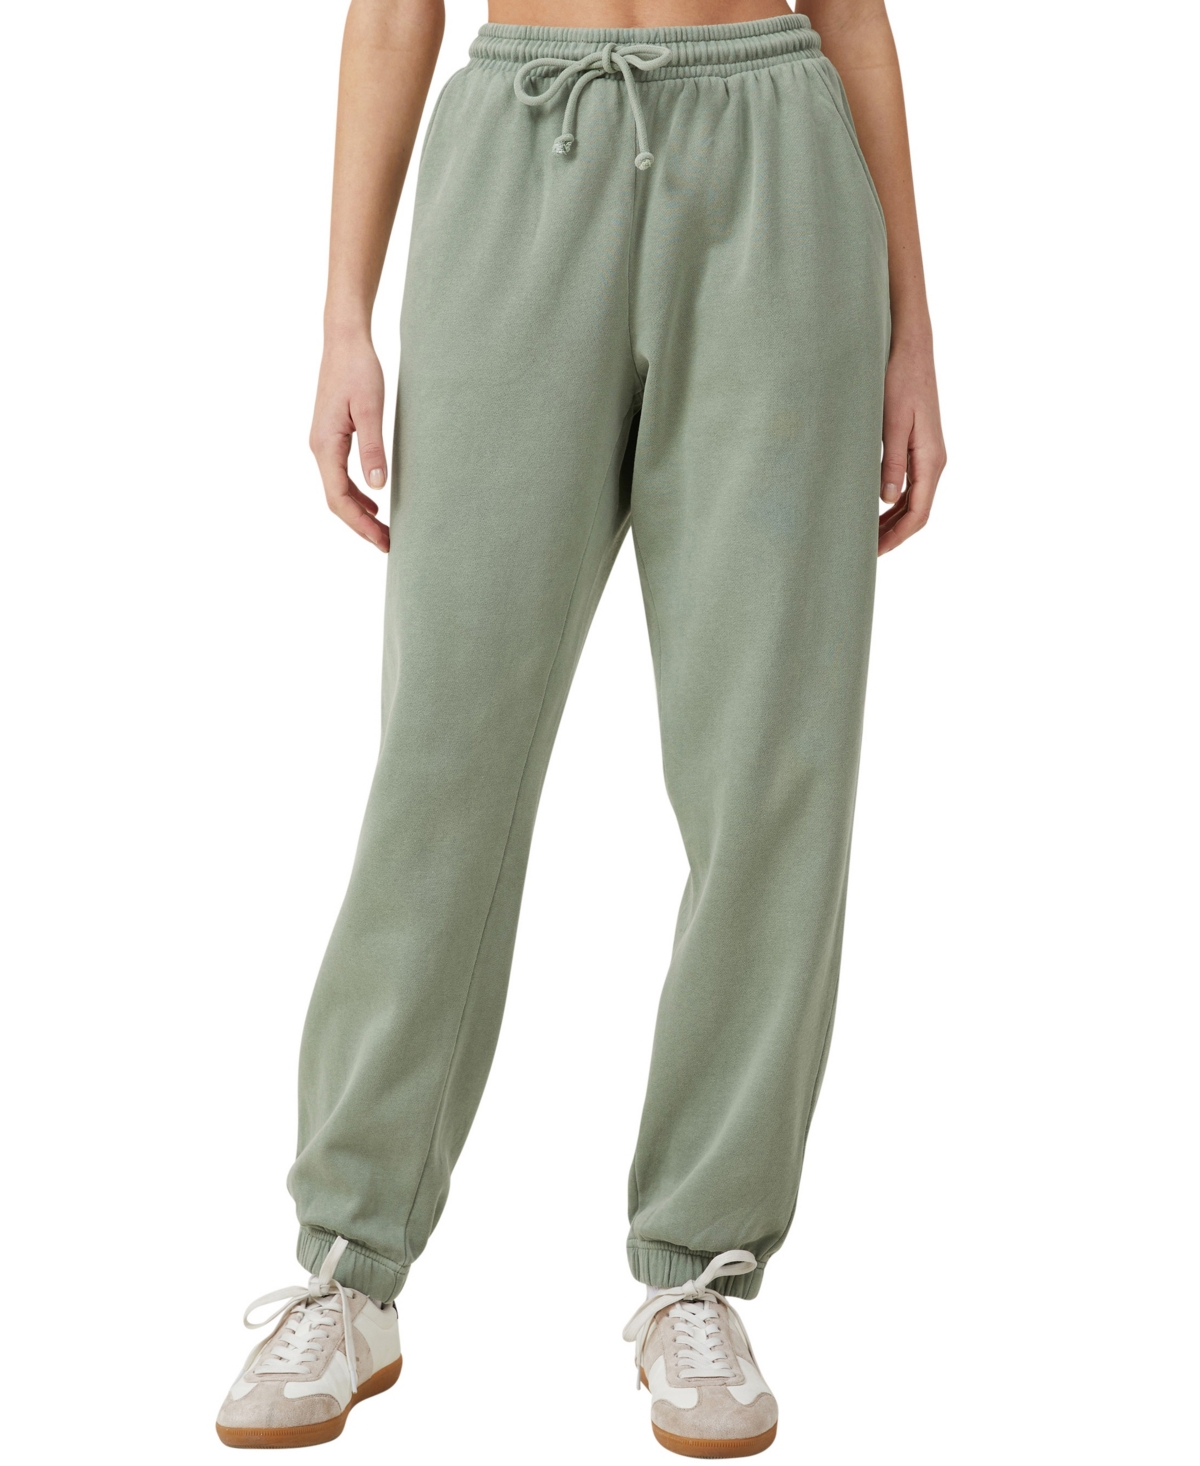 Women's Classic Washed Mid Rise Sweatpants - Washed Sage